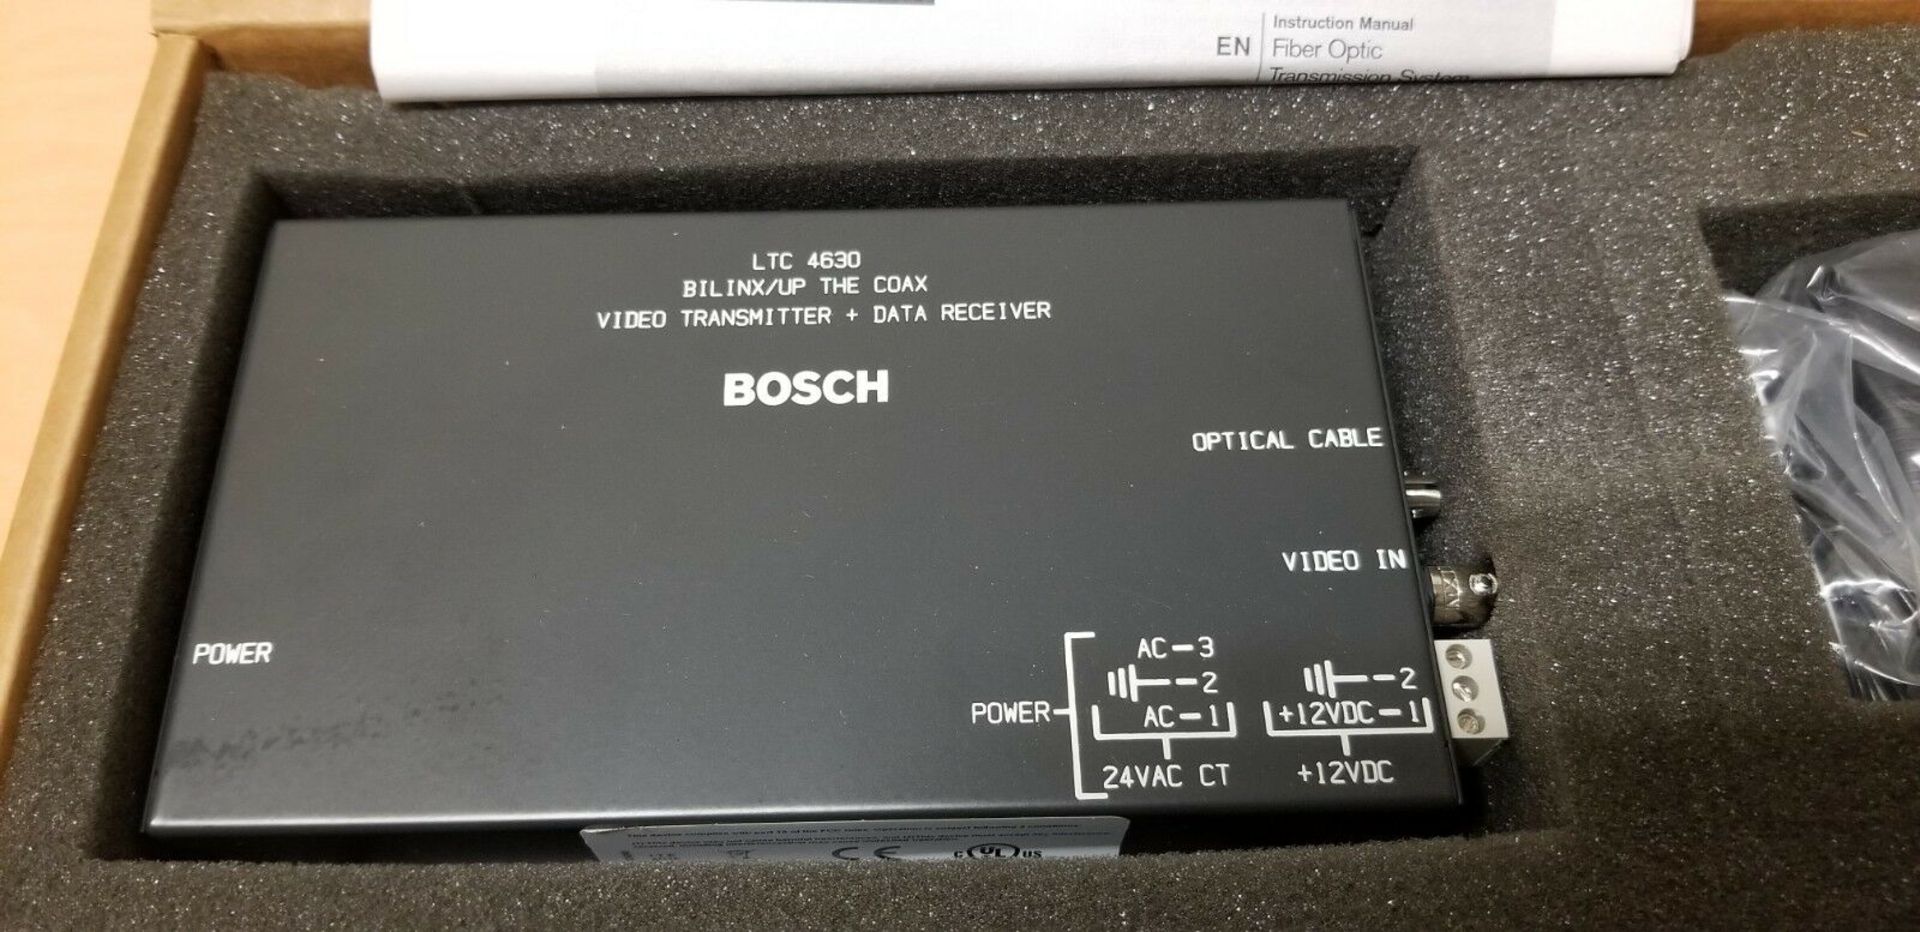 NEW BOSCH BILINX/UP THE COAX VIDEO TRANSMITTER + DATA RECEIVER - Image 3 of 4